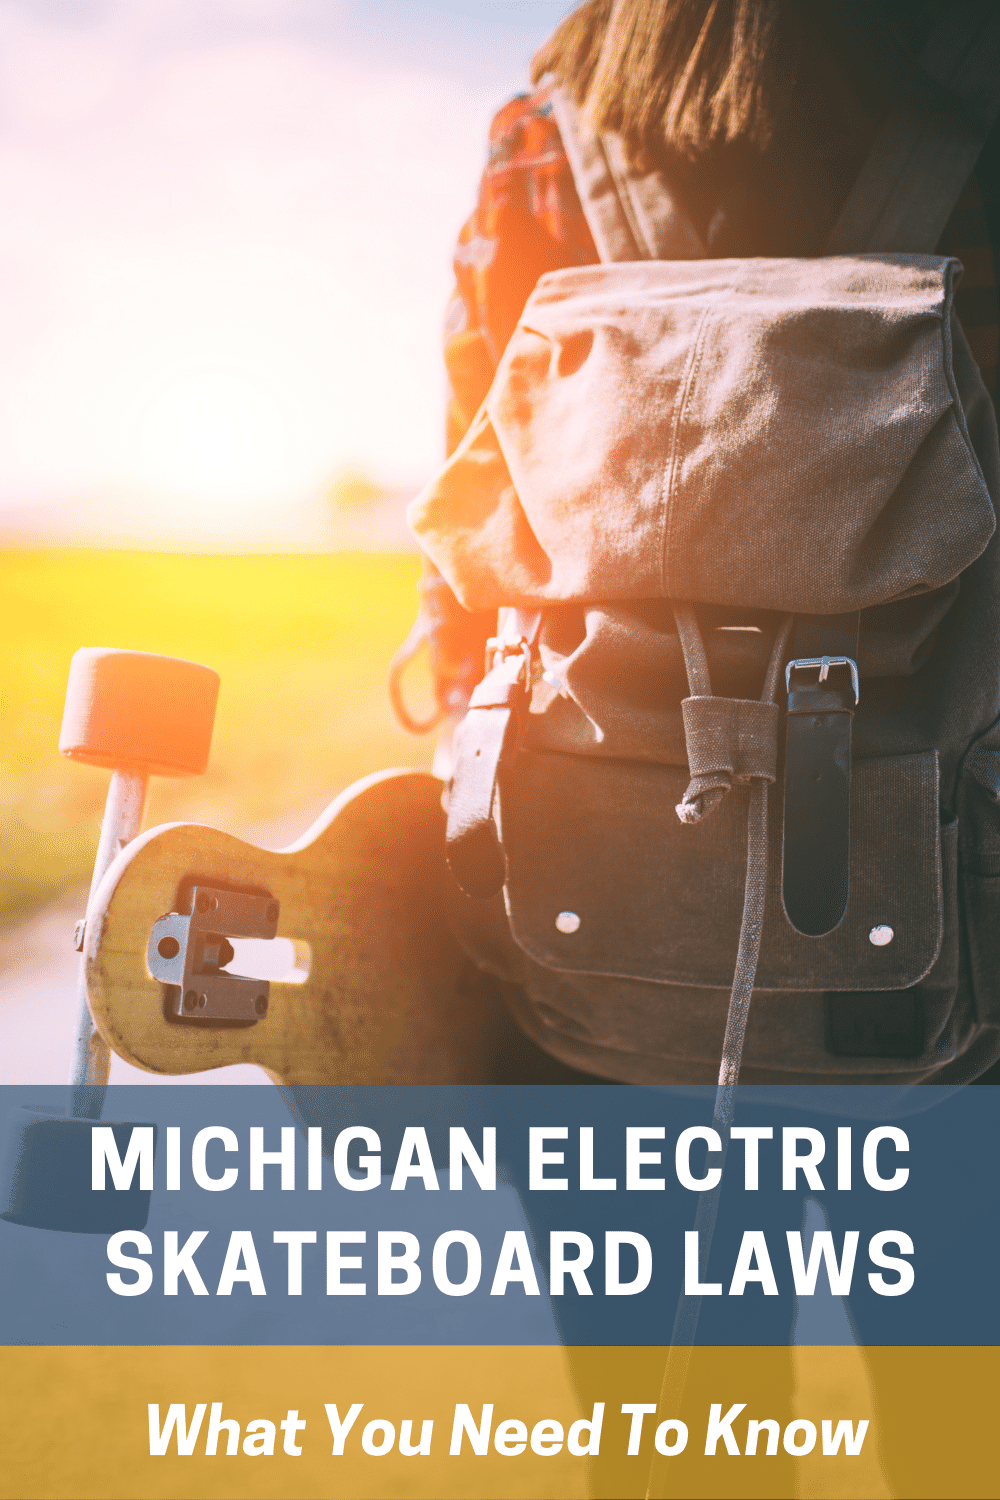 Michigan Electric Skateboard Laws: What You Need To Know